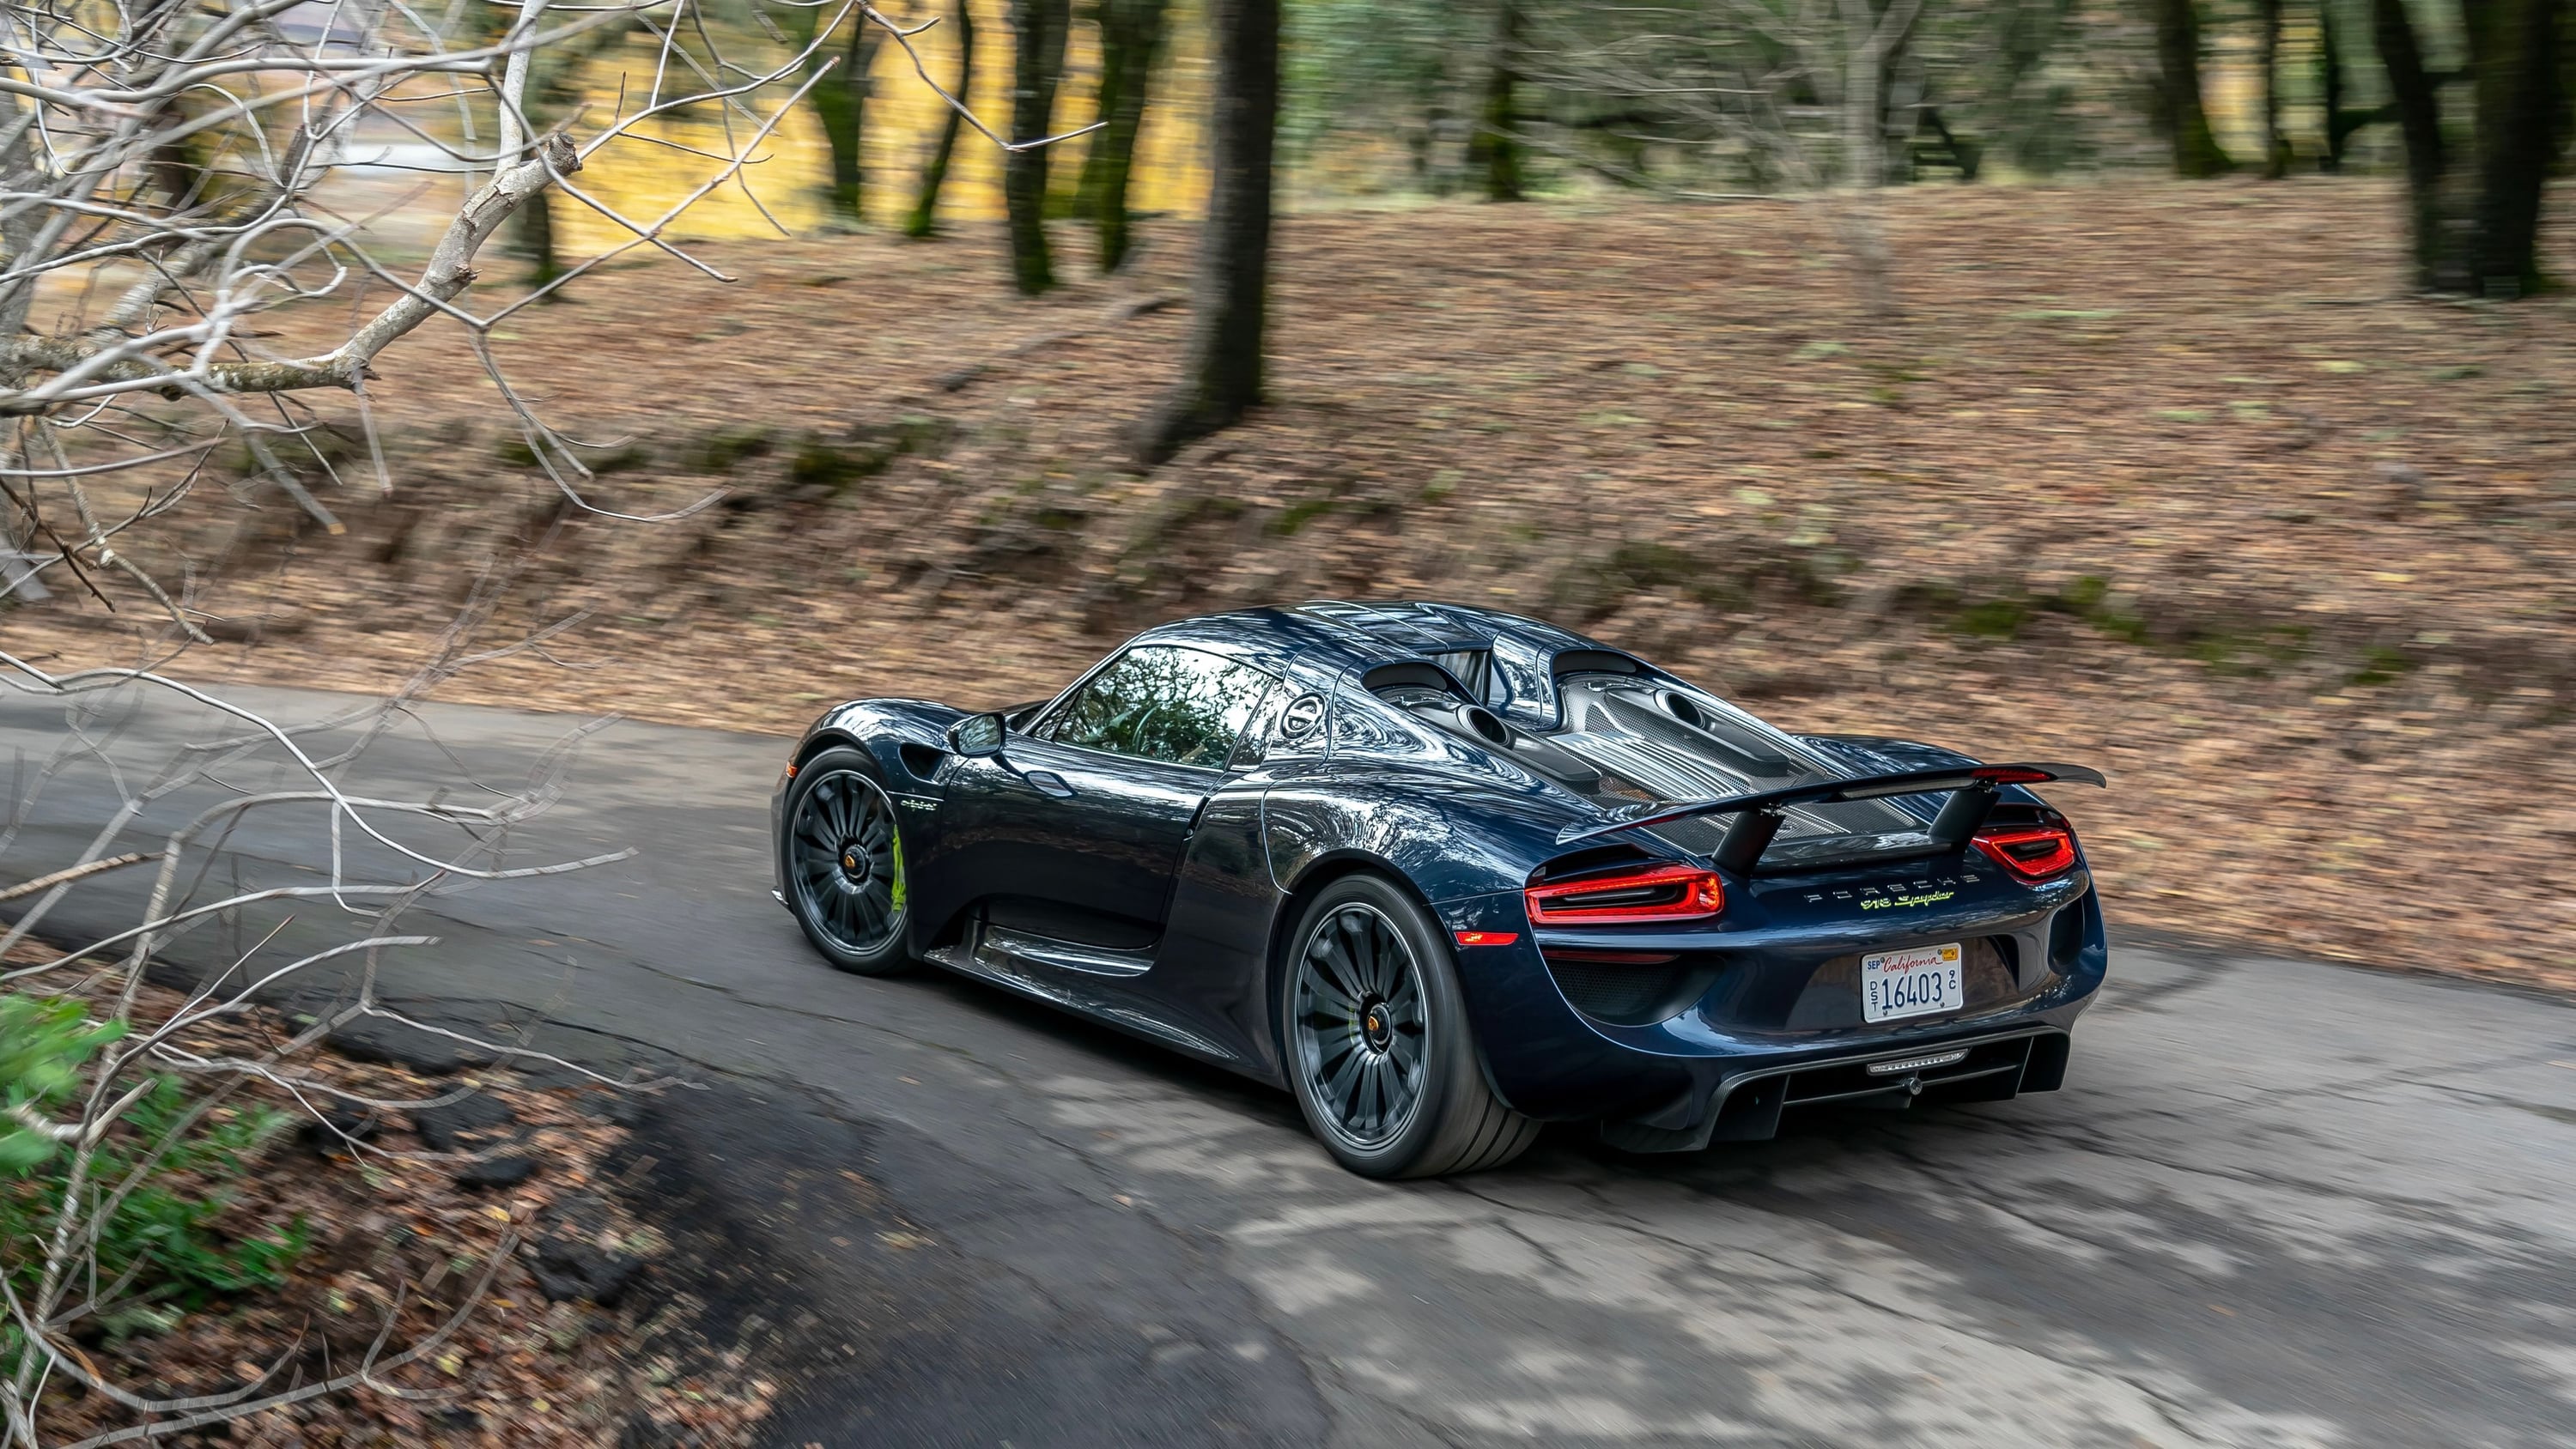 Man Buys Porsche 918 Spyder, Gets Government Subsidy